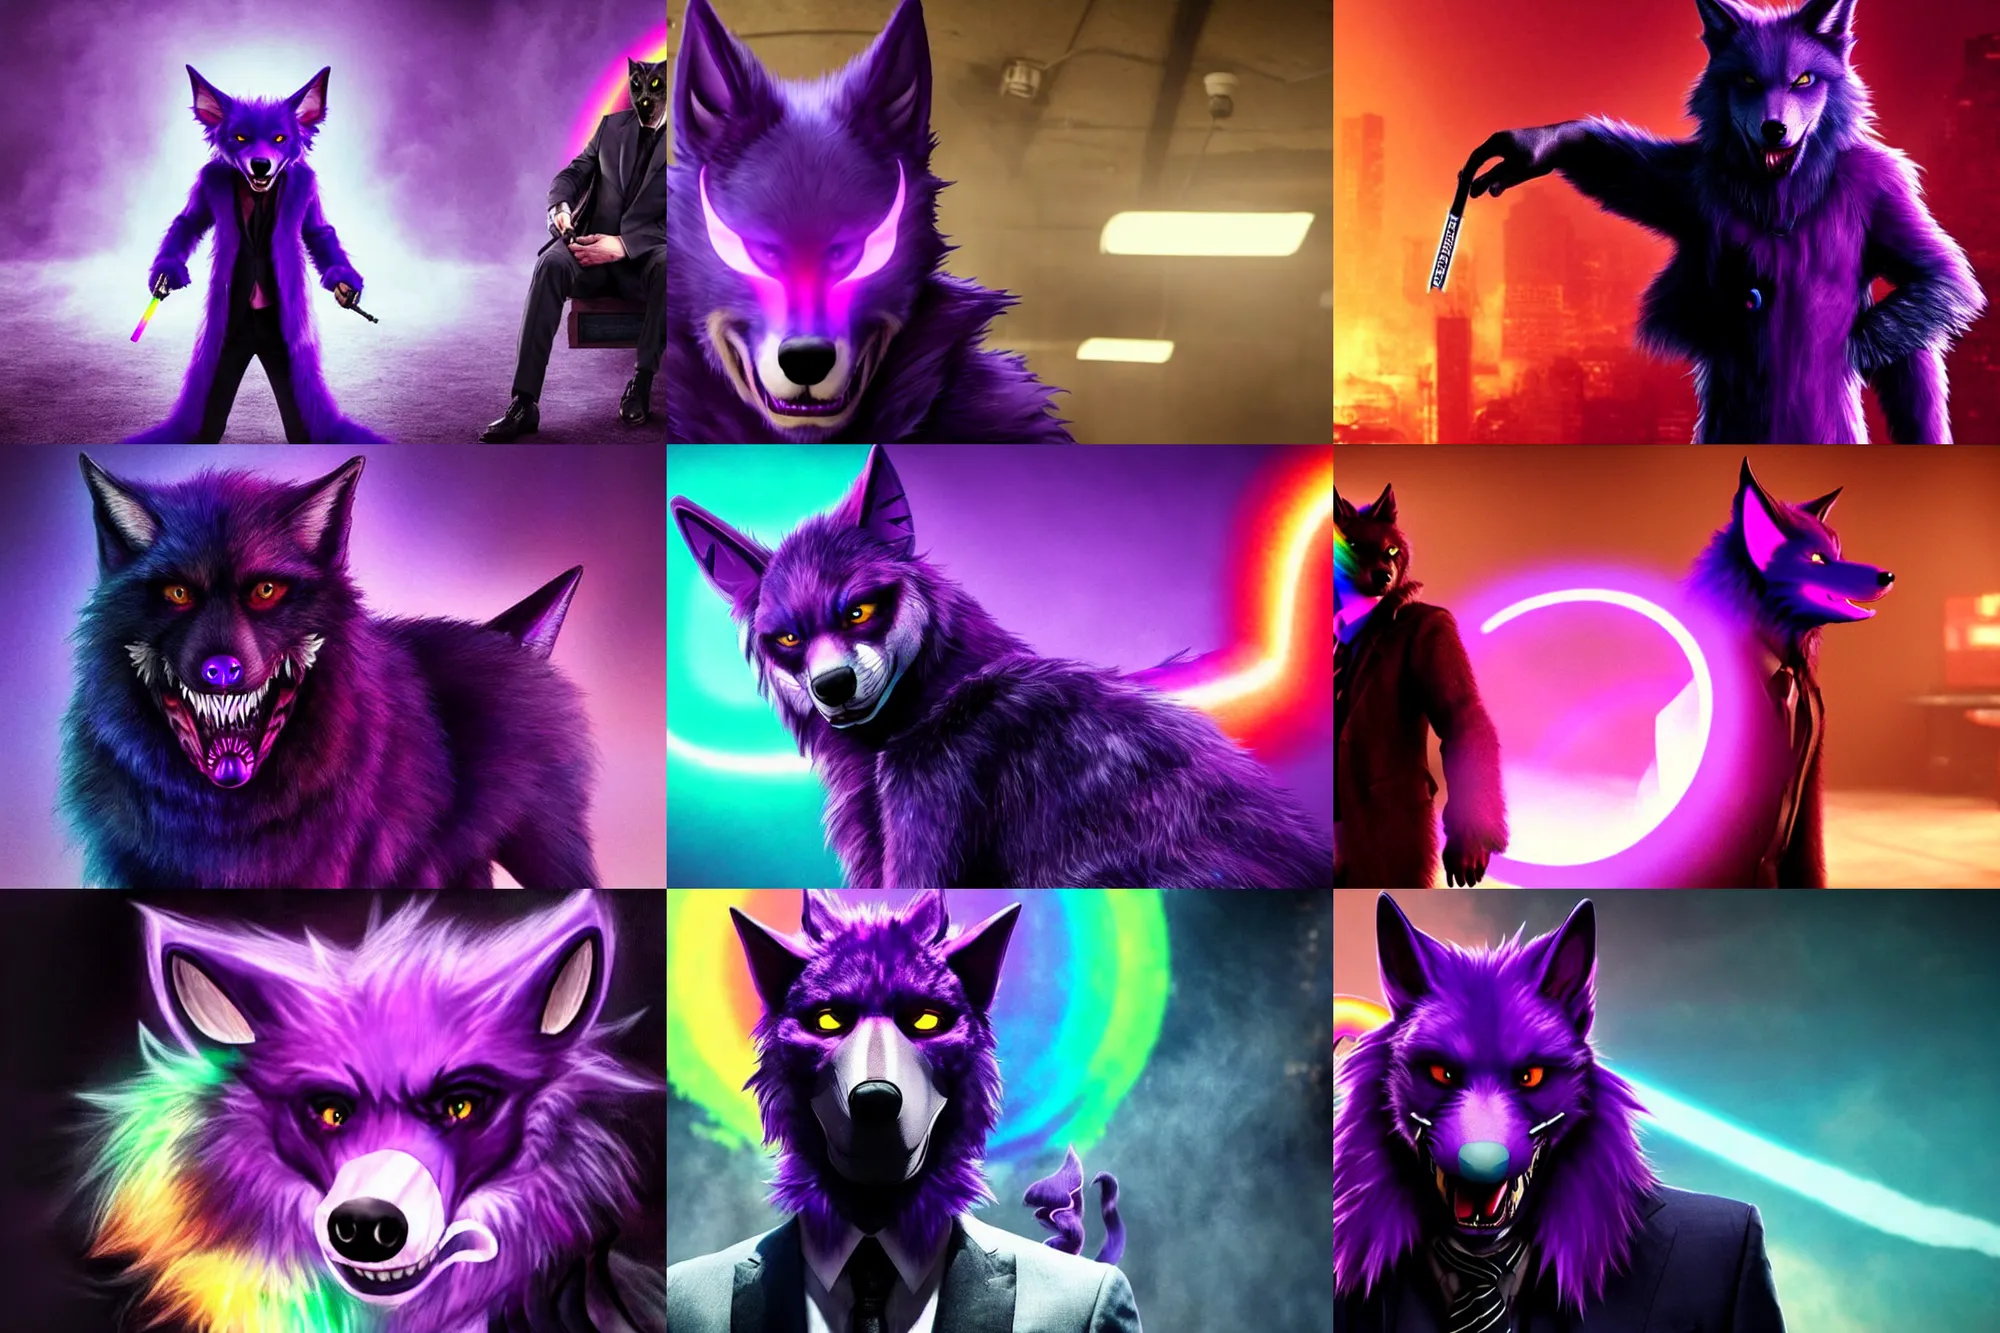 Image similar to ( with a glowing rainbow tail ) a purple wolfbat fursona ( from the furry fandom ) wearing an eyepatch, as a photo from the john wick movie series